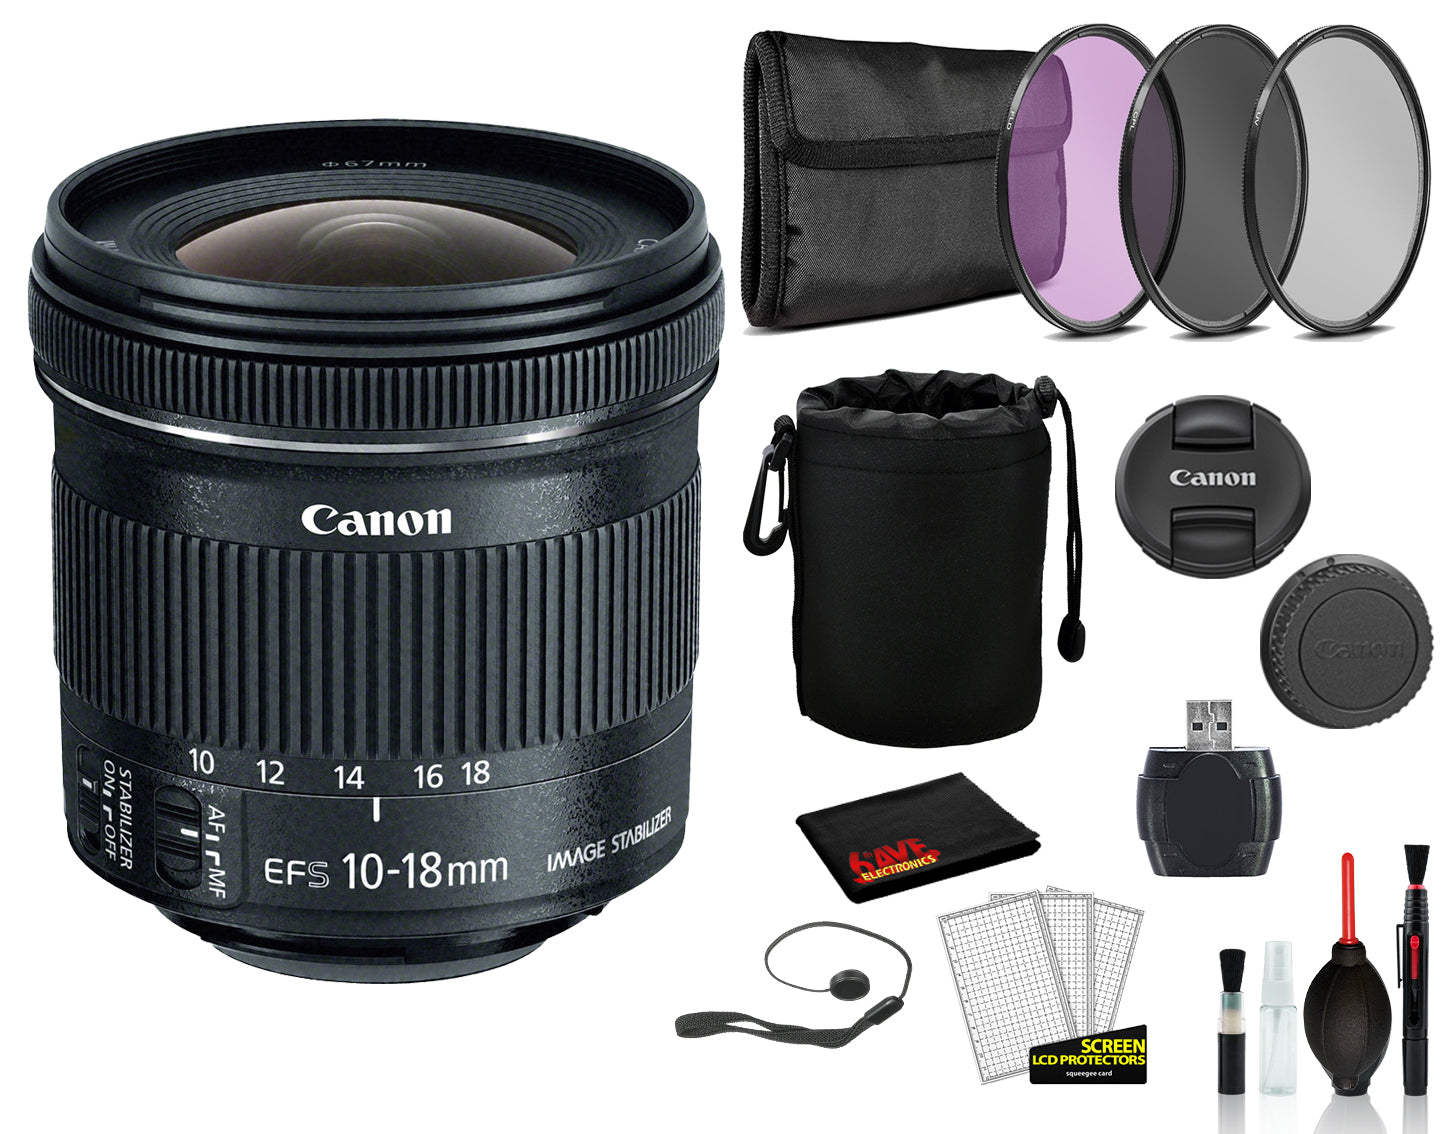 Canon EF-S 10-18mm f/4.5-5.6 IS STM Lens (9519B002) Lens with Bundle includes 3pc Filter Kit + Lens Pouch + More